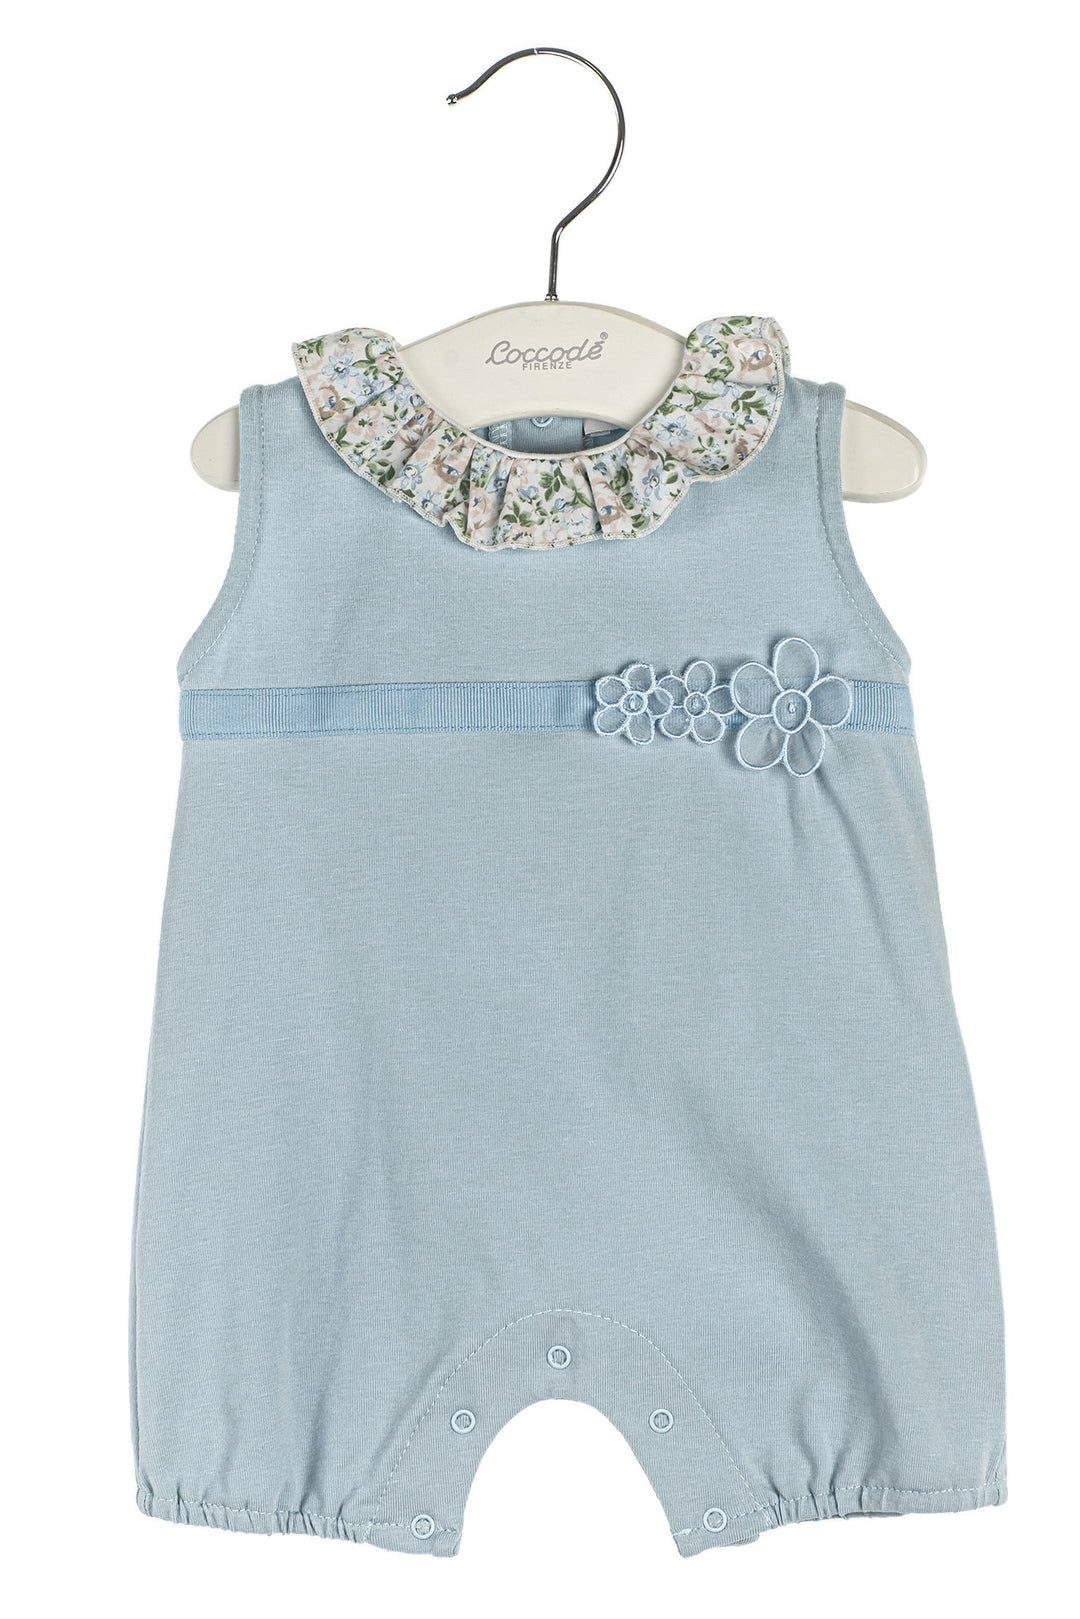 Coccodè "Camille" Powder Blue Floral Romper | iphoneandroidapplications